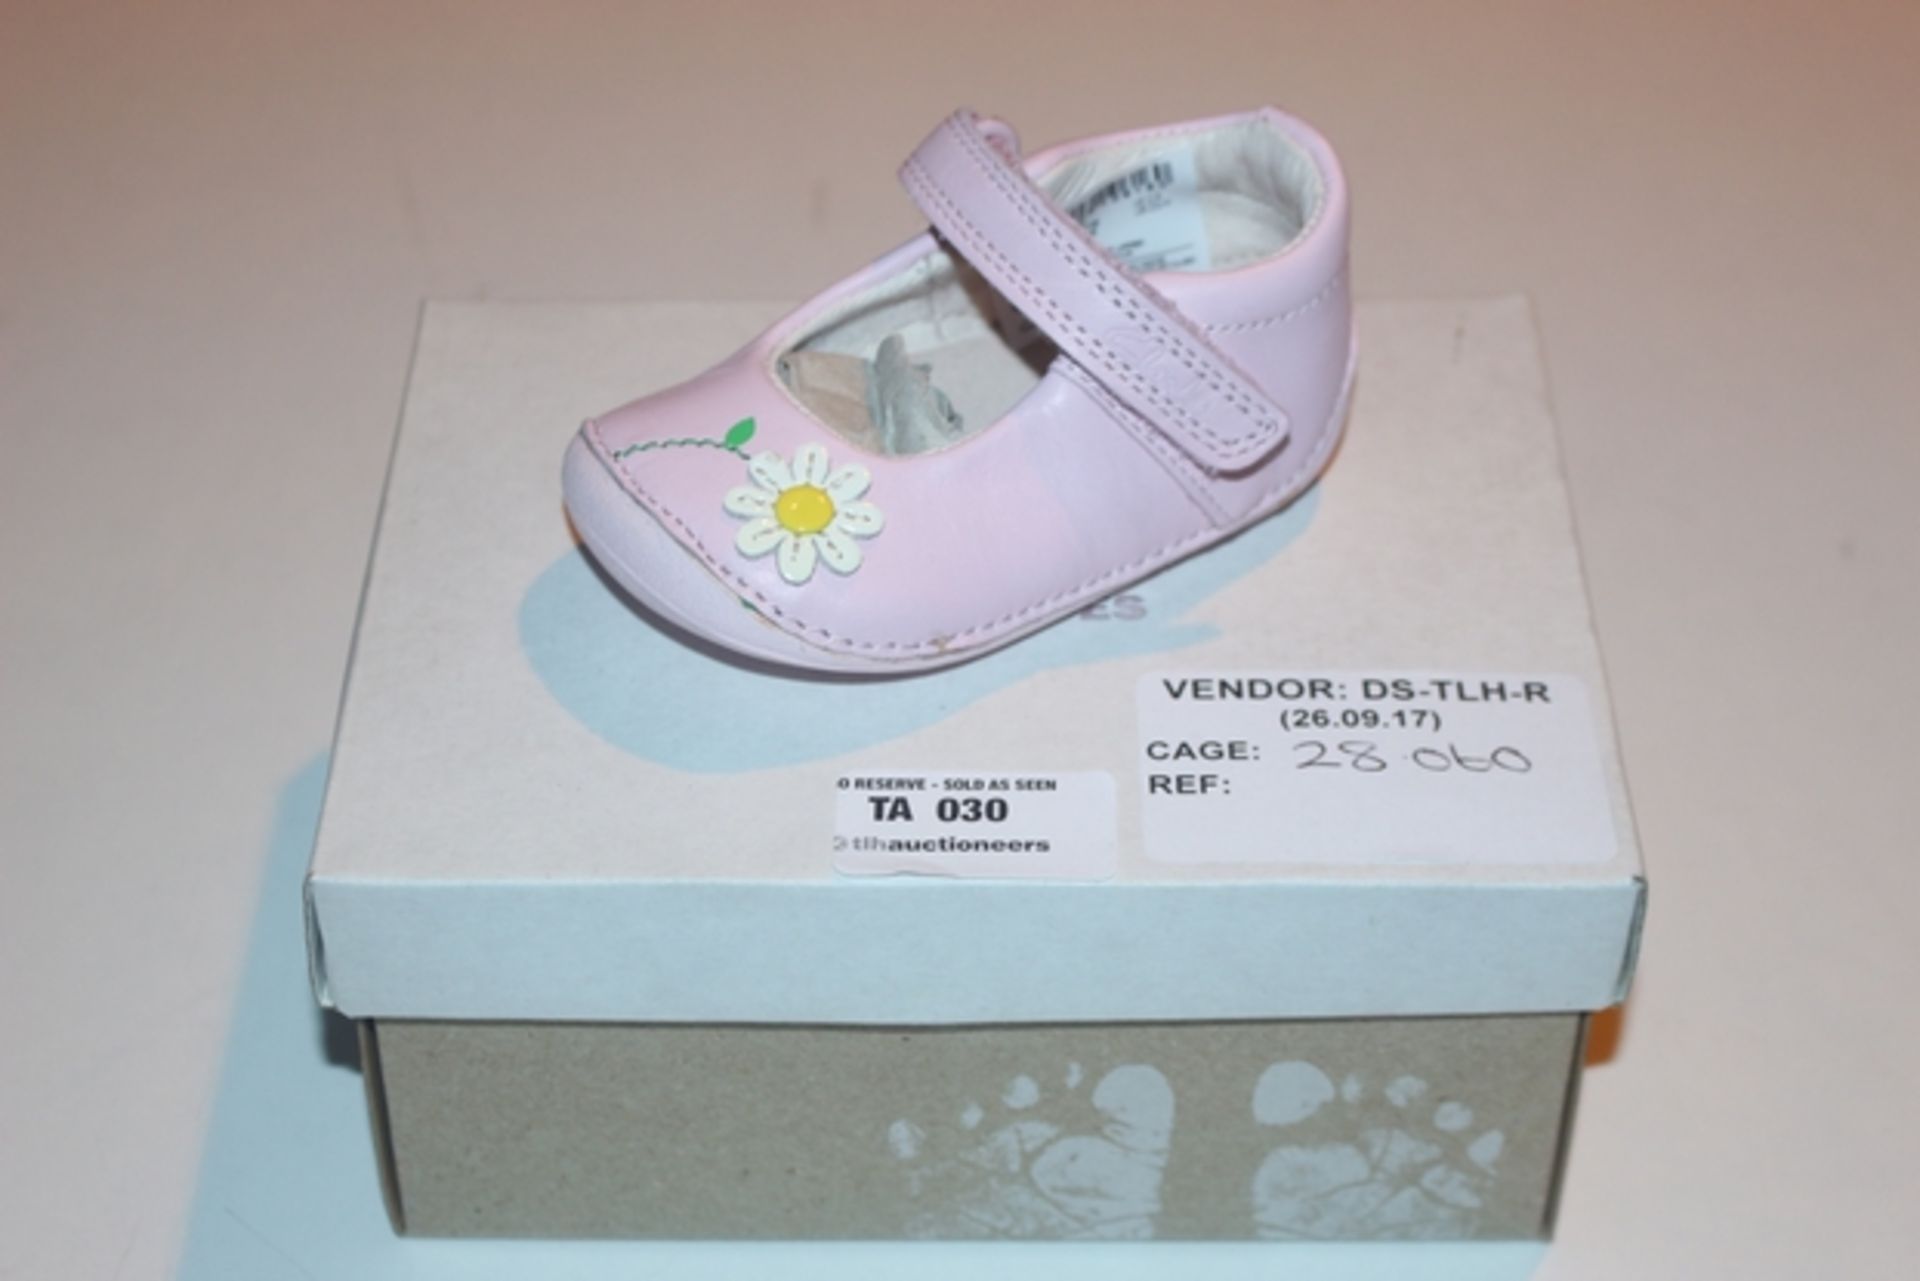 1X BOXED UNUSED PAIR OF CLARKS CHILDREN'S SHOES SIZE 2G RRP £30 (DS-TLH-R) (28.060) - Image 2 of 2